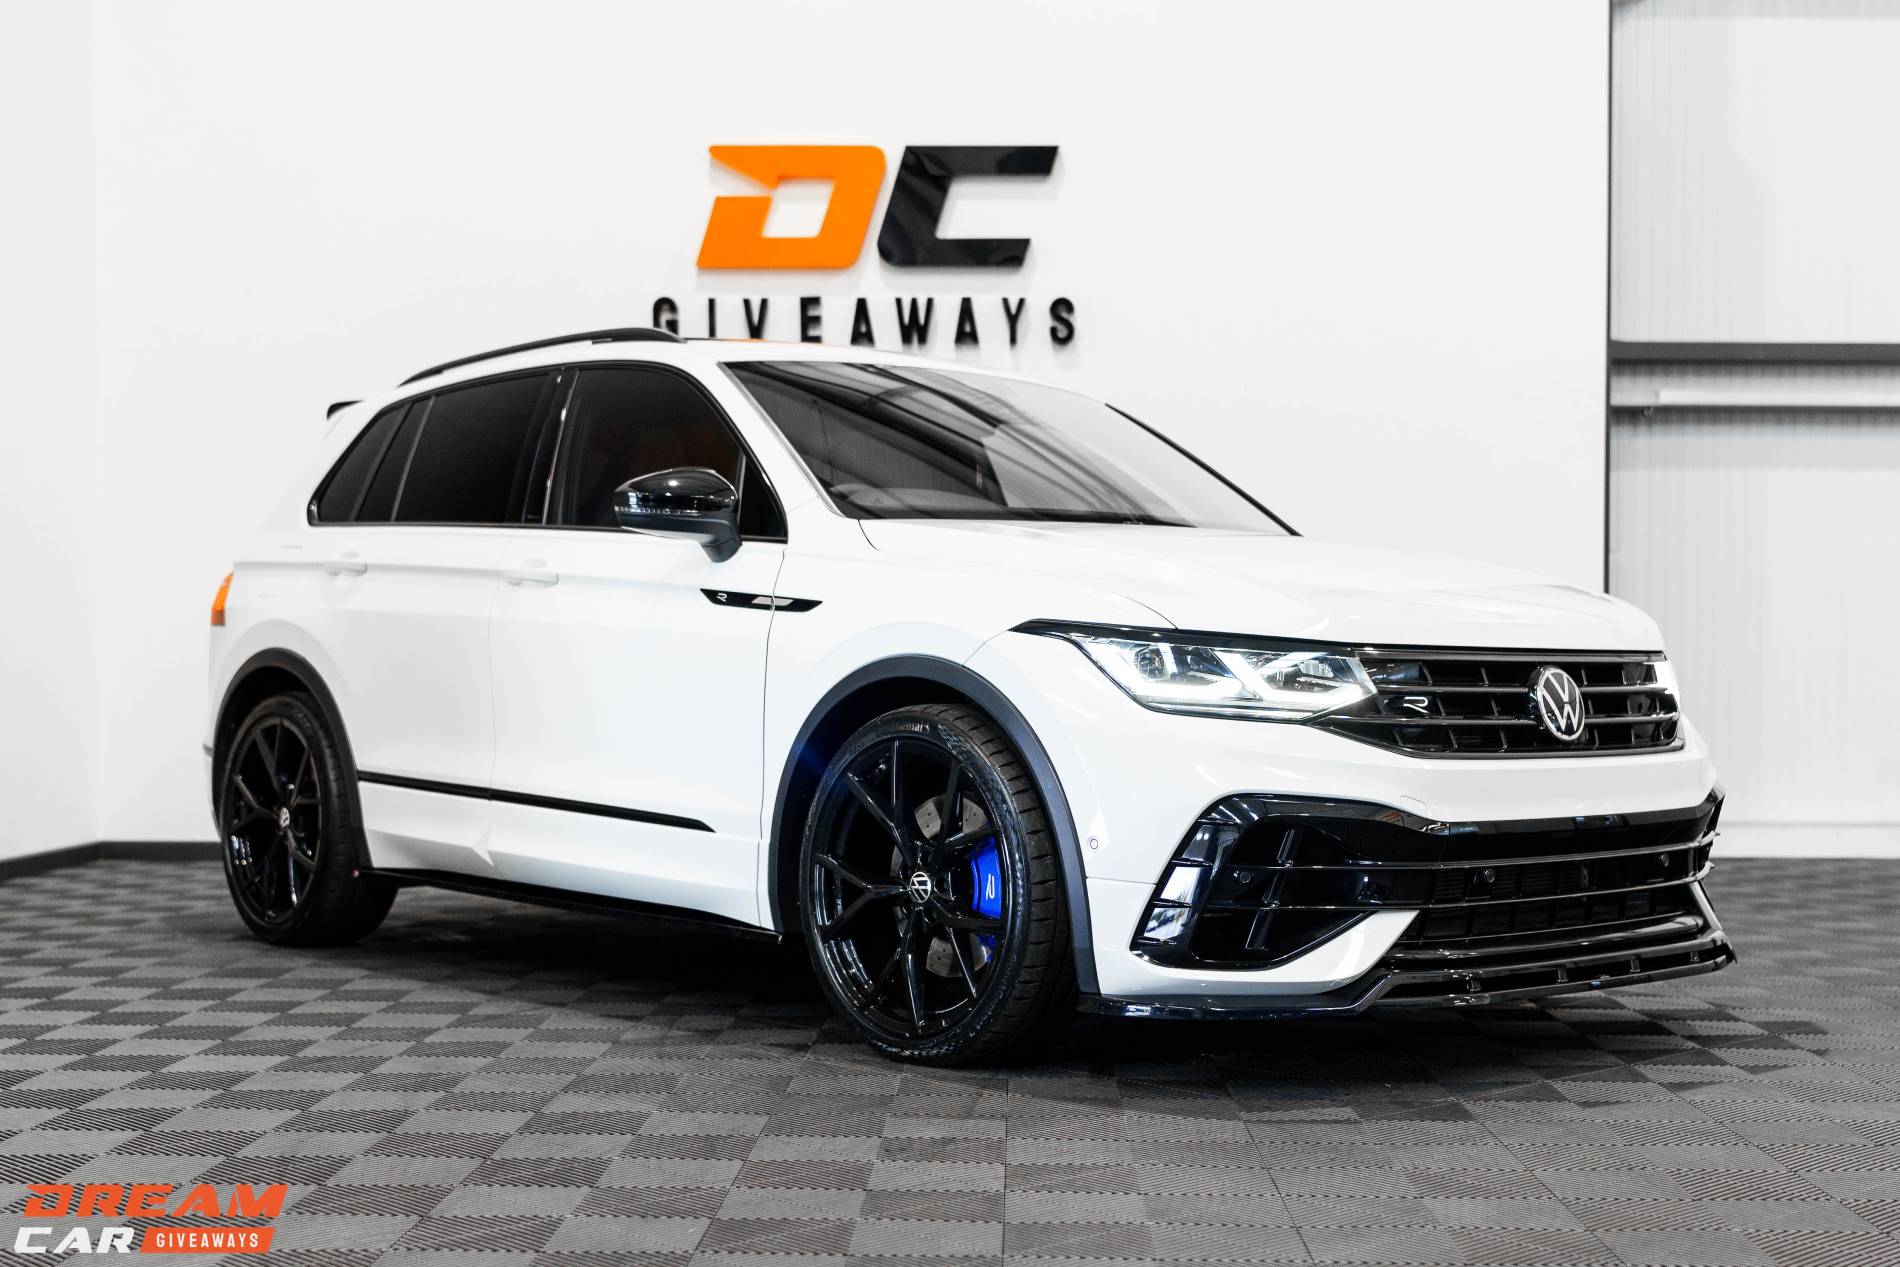 Win this 2021 Volkswagen Tiguan R & £2,000 or £30,000 Tax Free